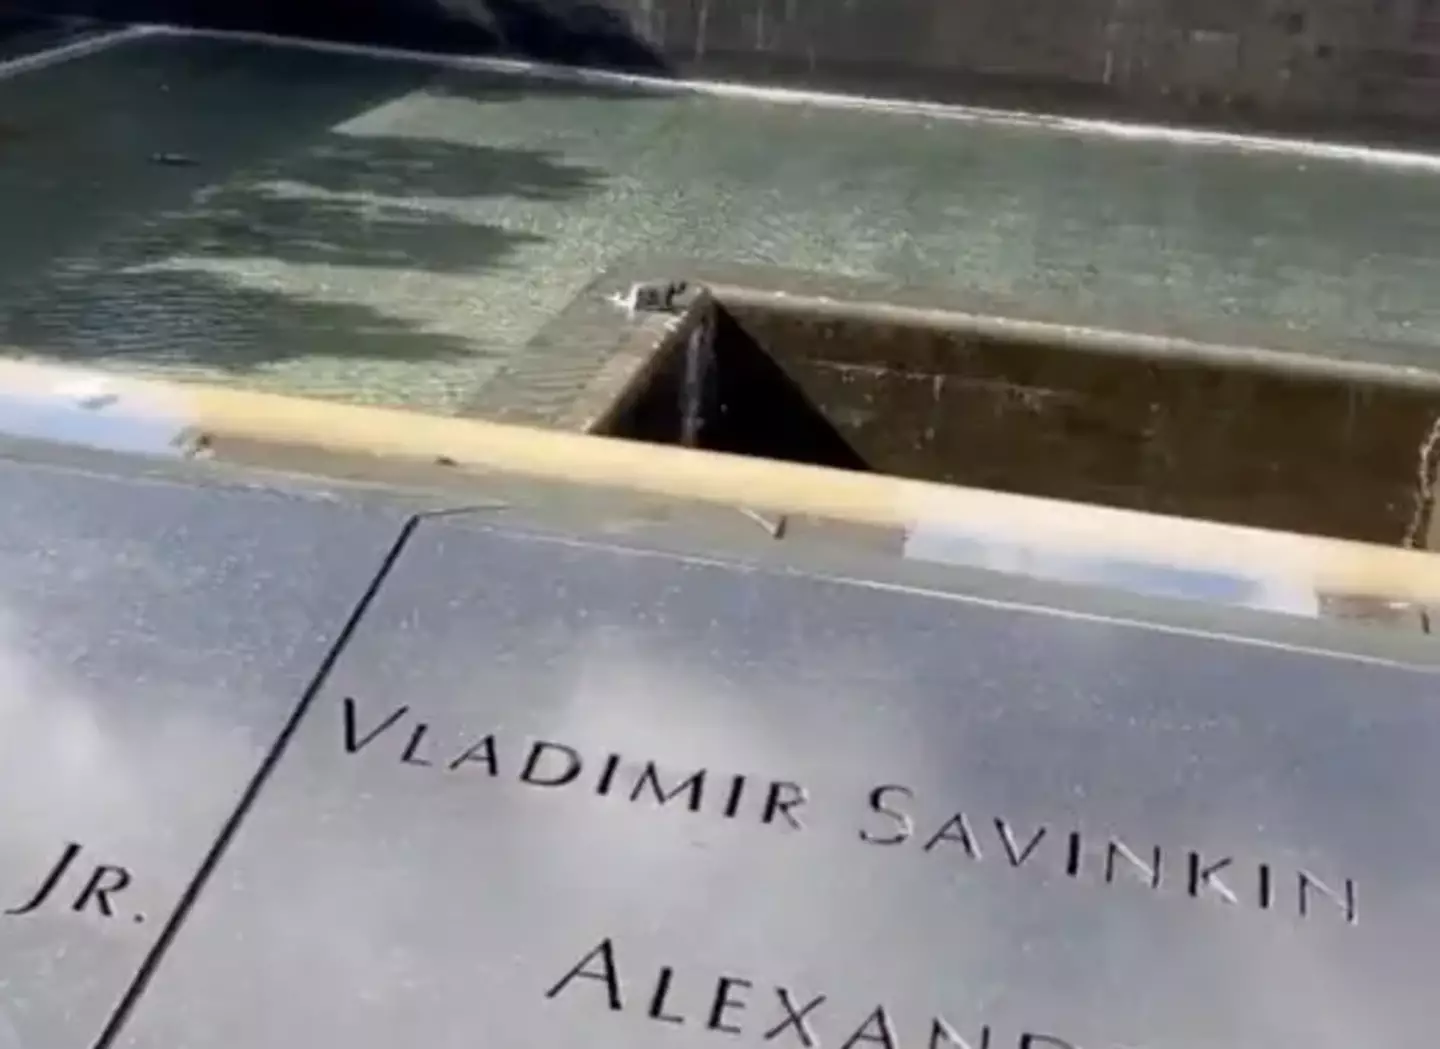 A man was seen jumping into the North Pool at New York City's 9/11 memorial.